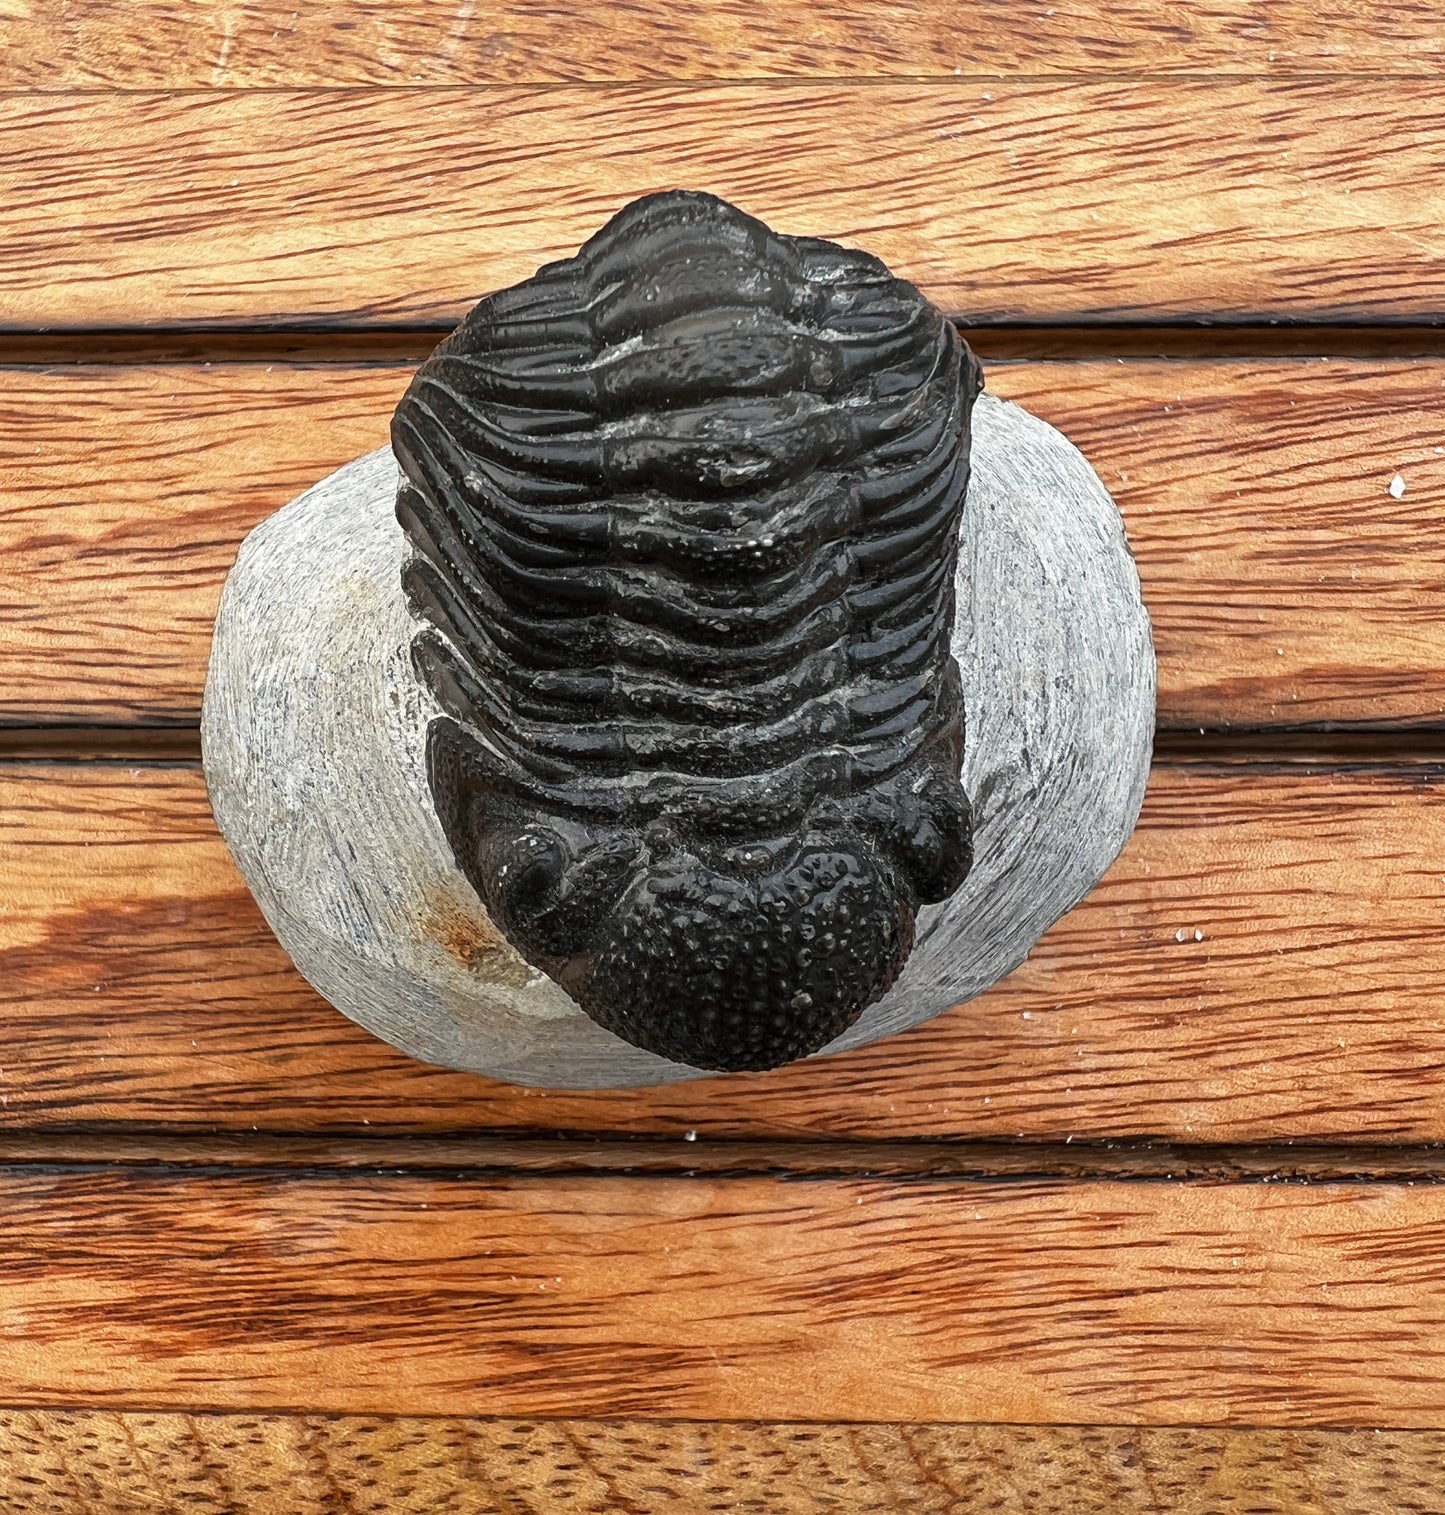 Trilobite from Morocco in Concentration